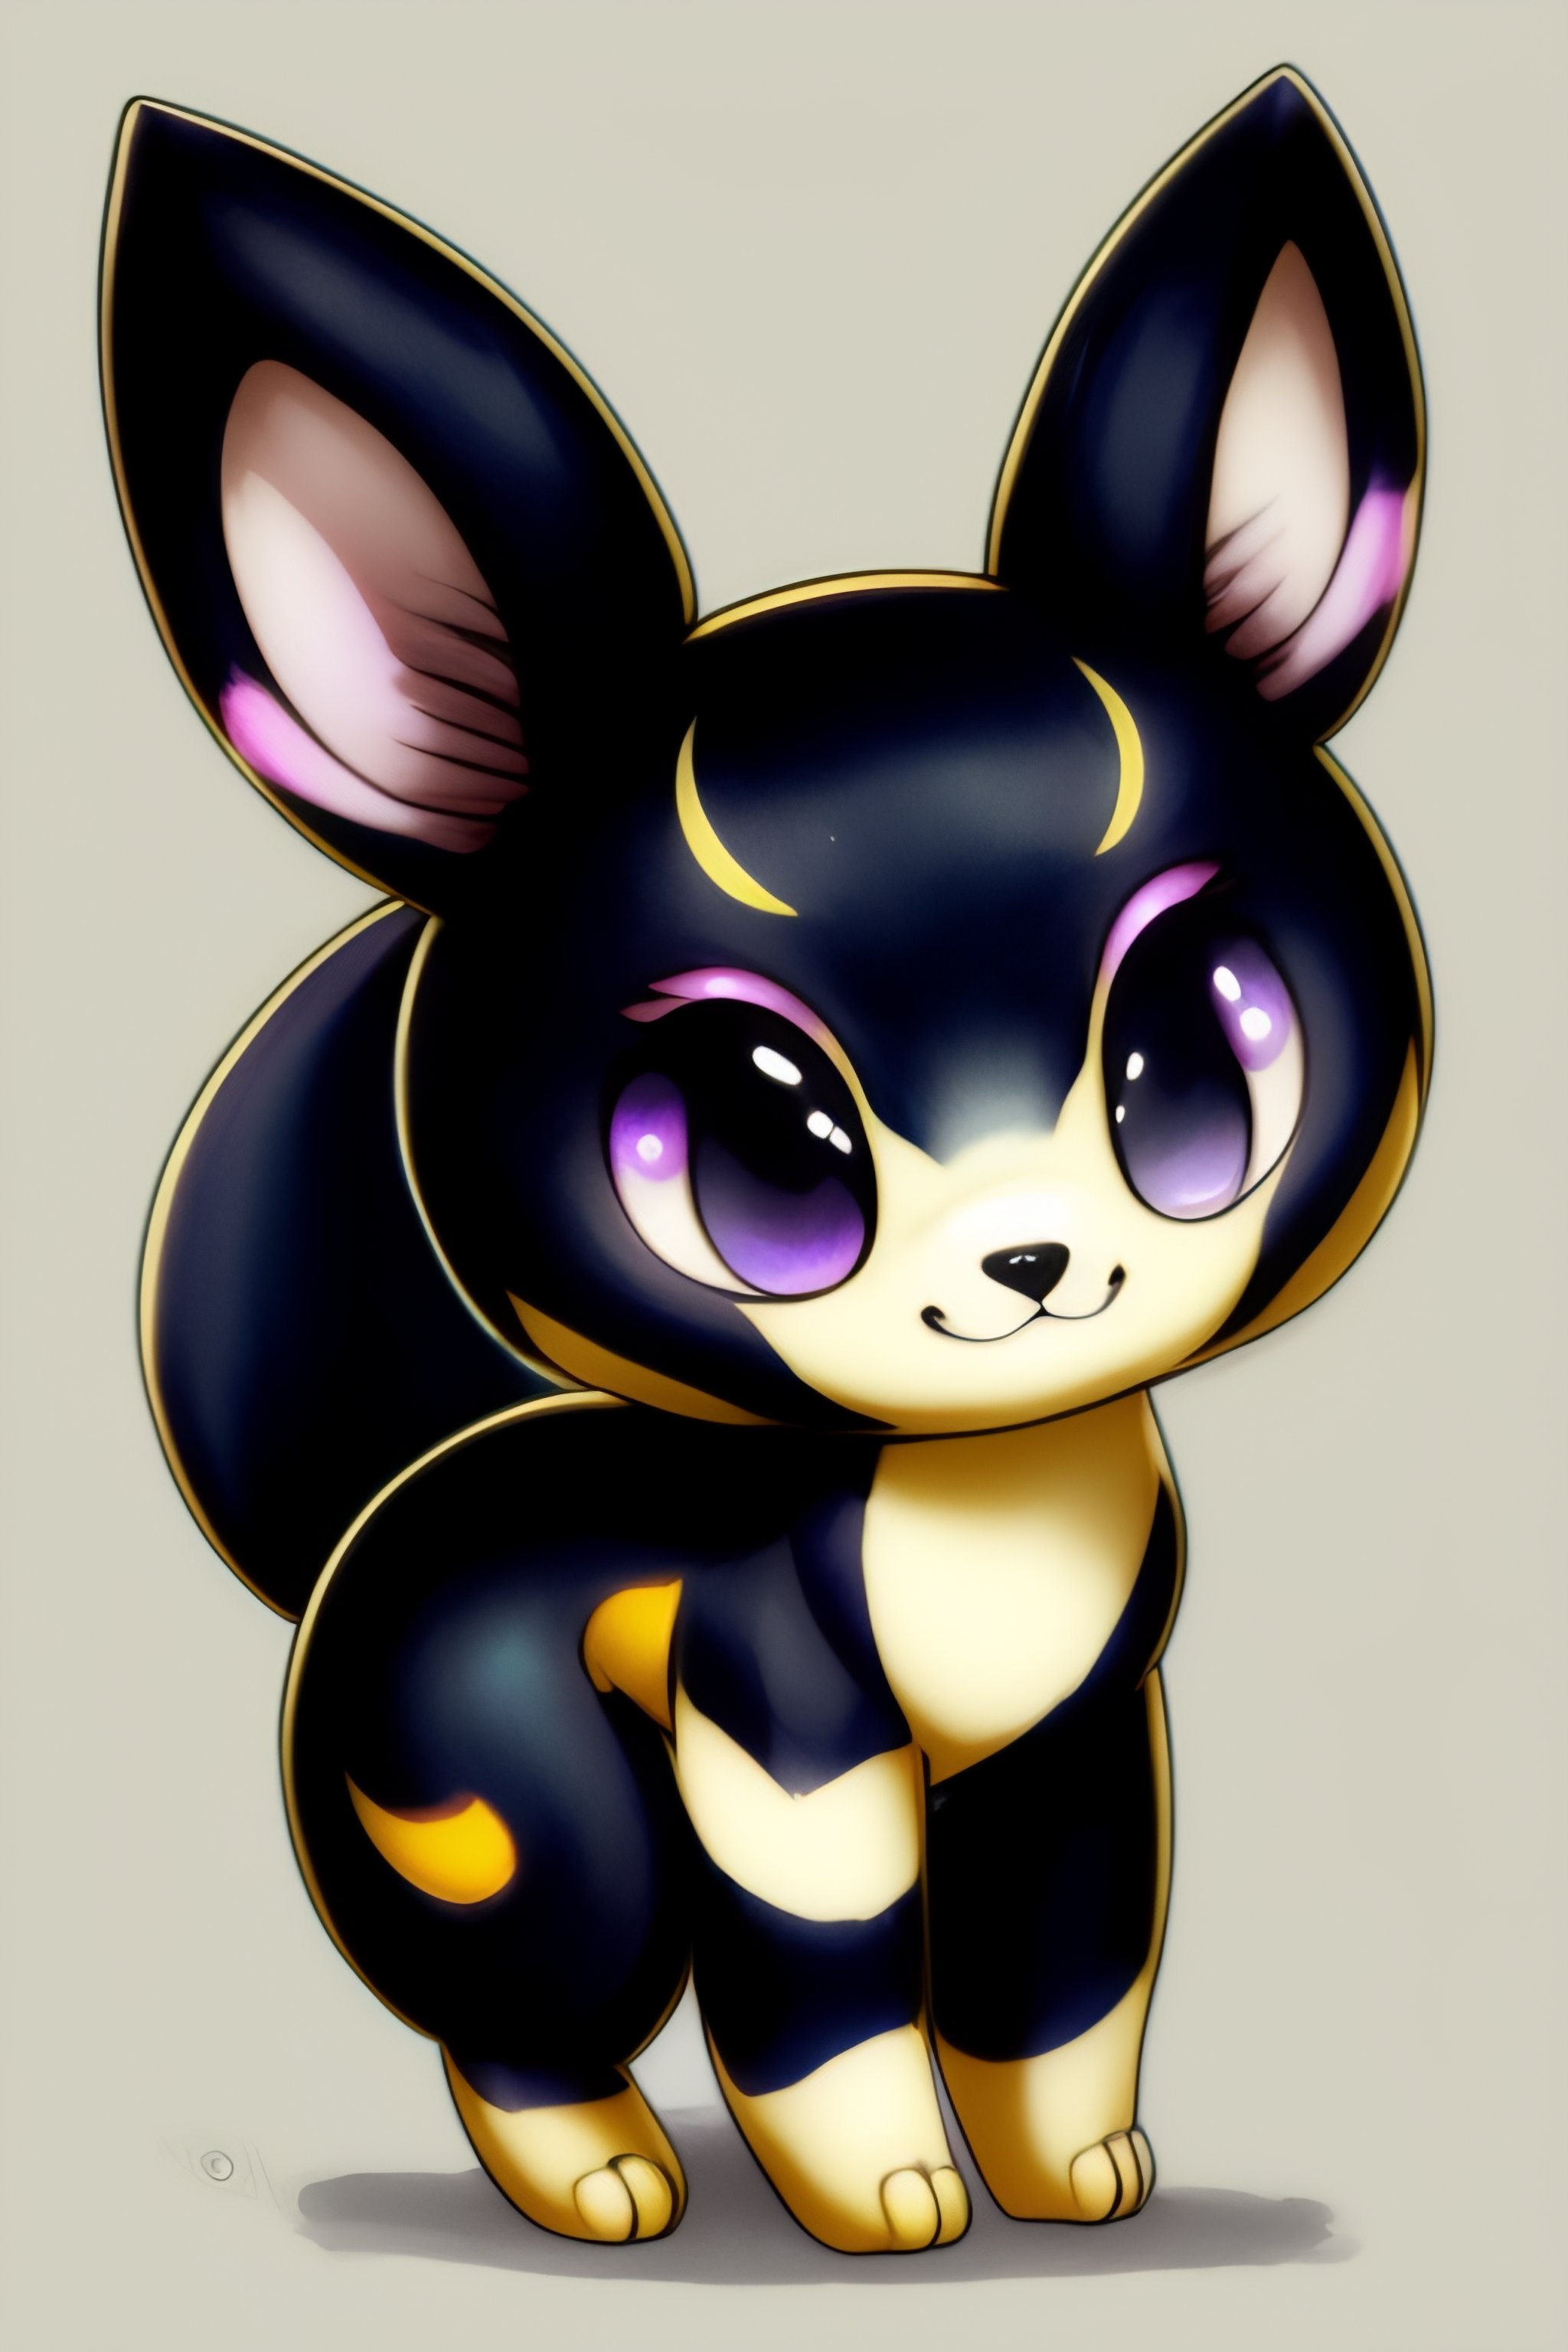 Lexica - Cute chibi Umbreon fakemon by Ken sugimori, ink and ...